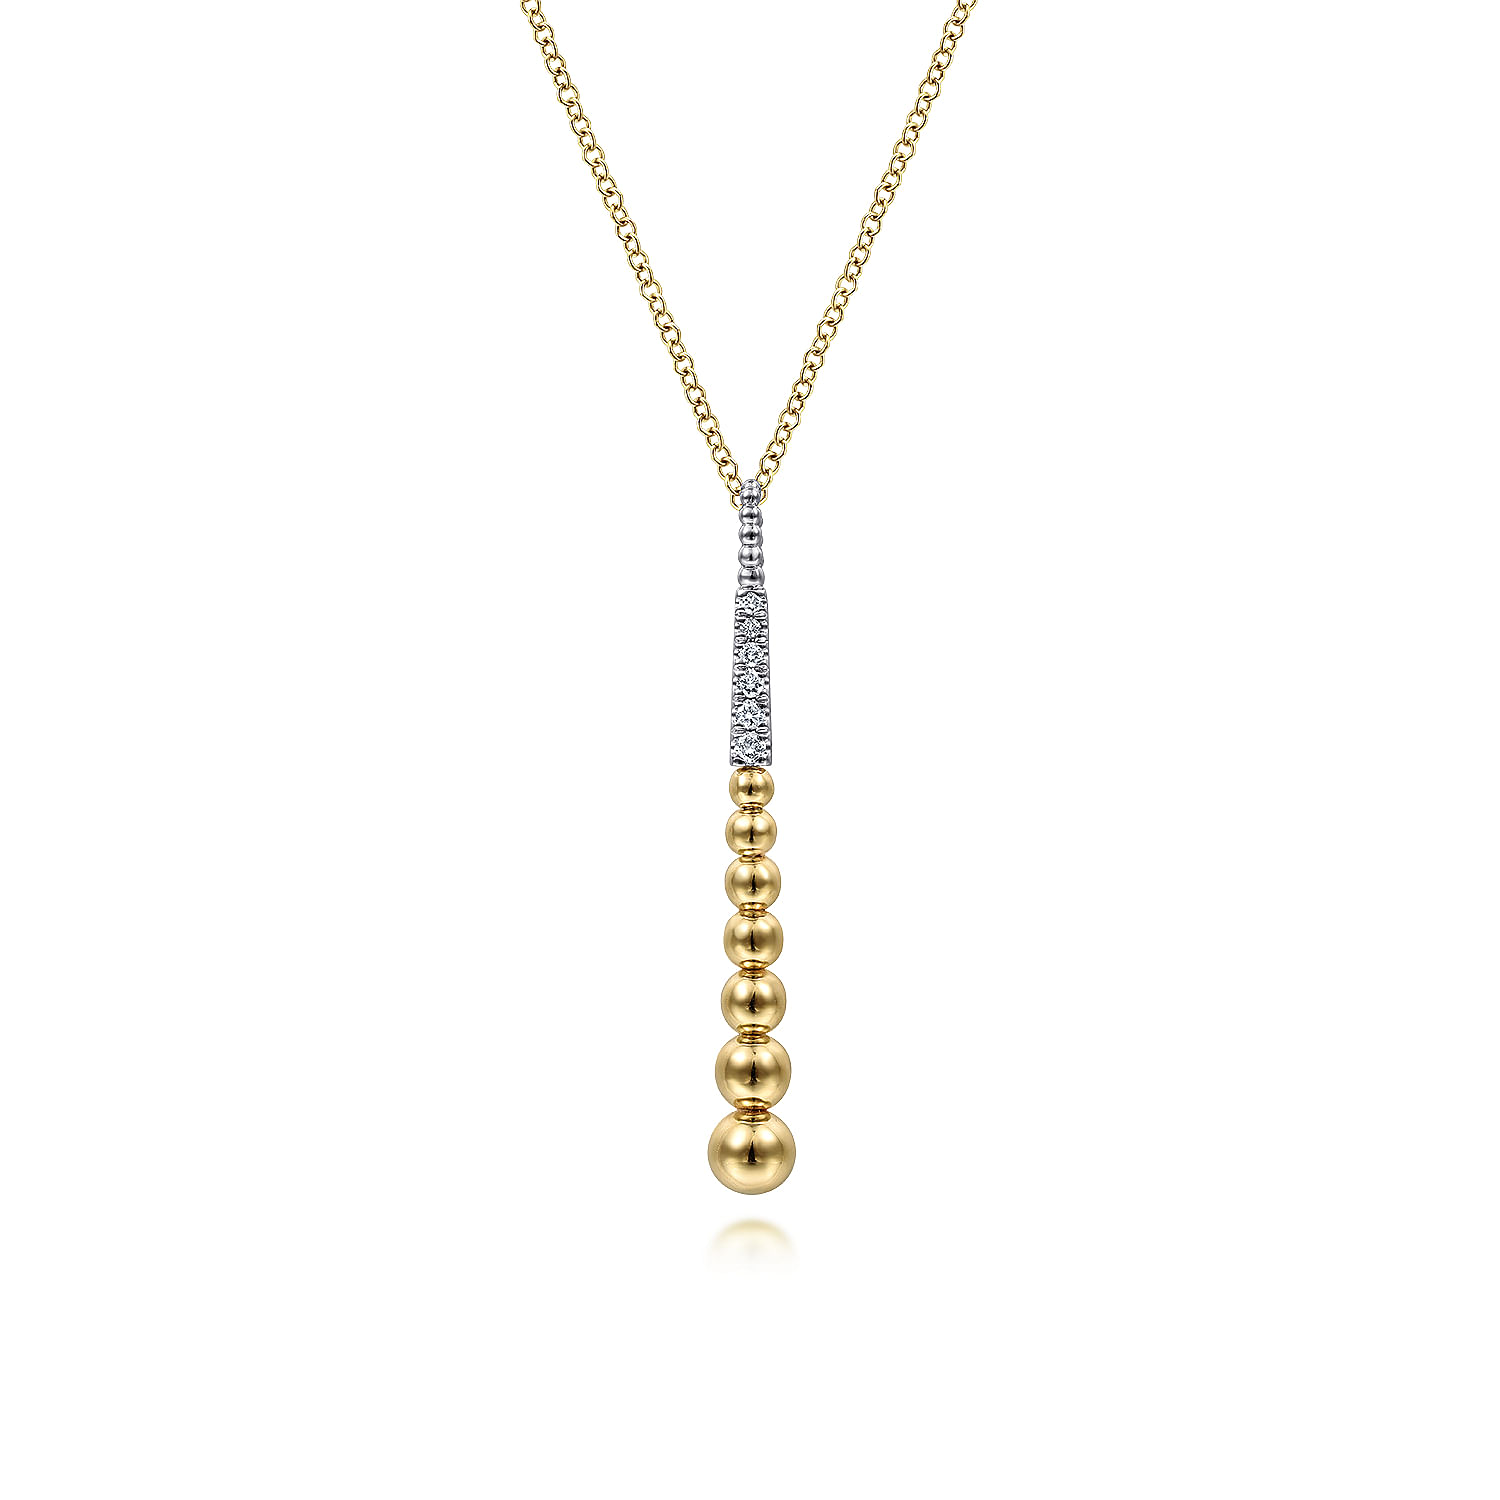 14K Yellow-White Gold Bujukan Bead Y Necklace with Diamond Pavé Accent